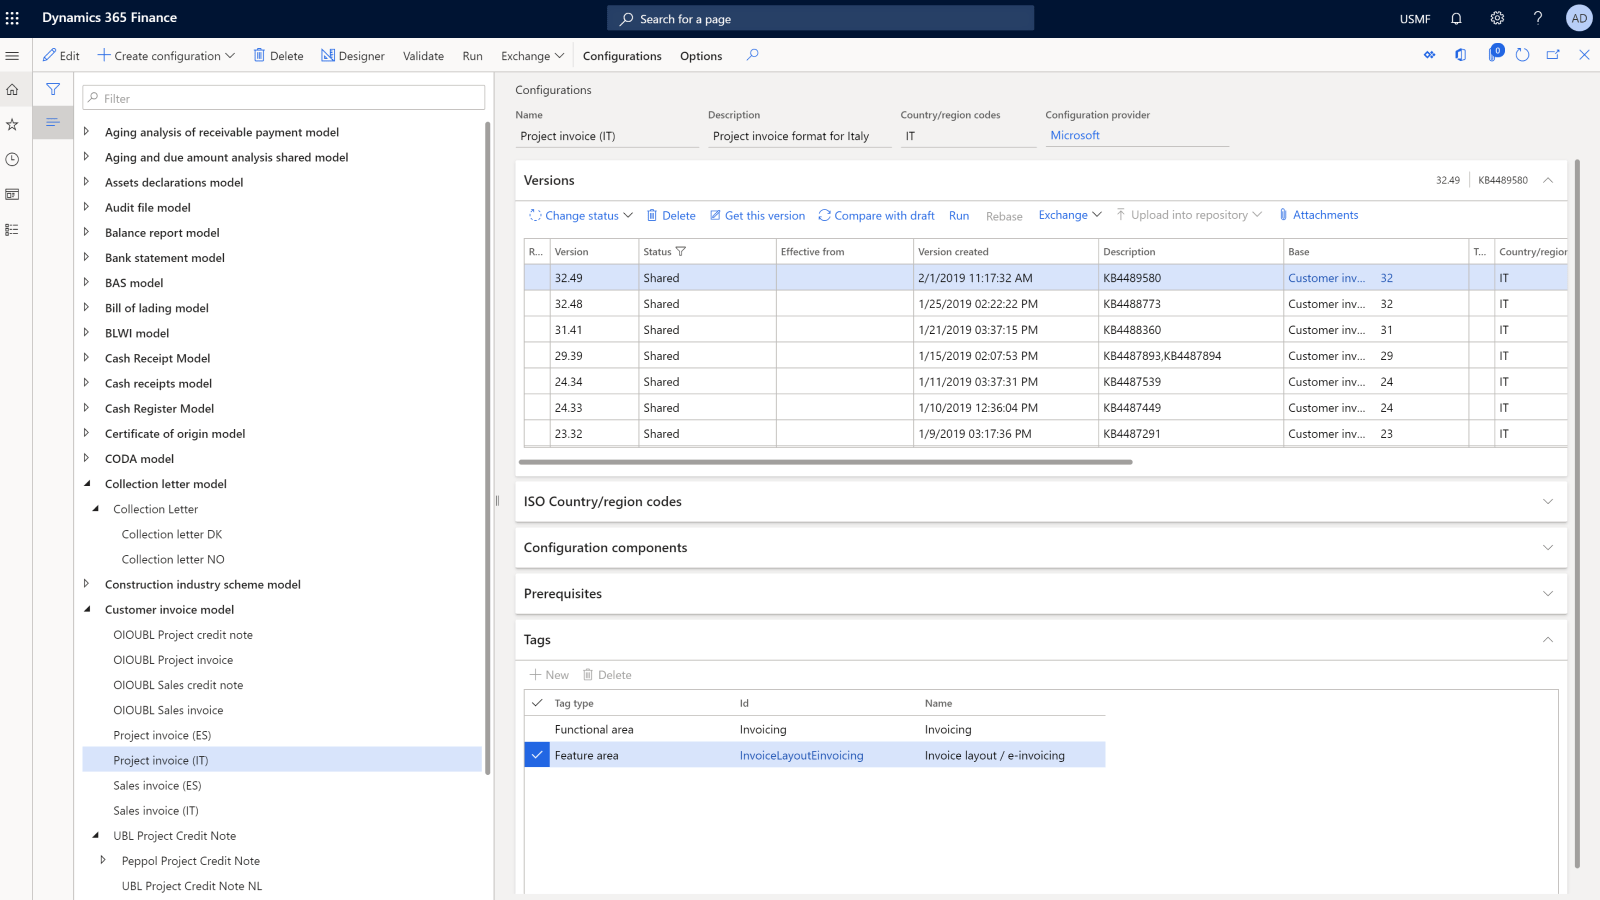 Image of dynamics 365 finance table